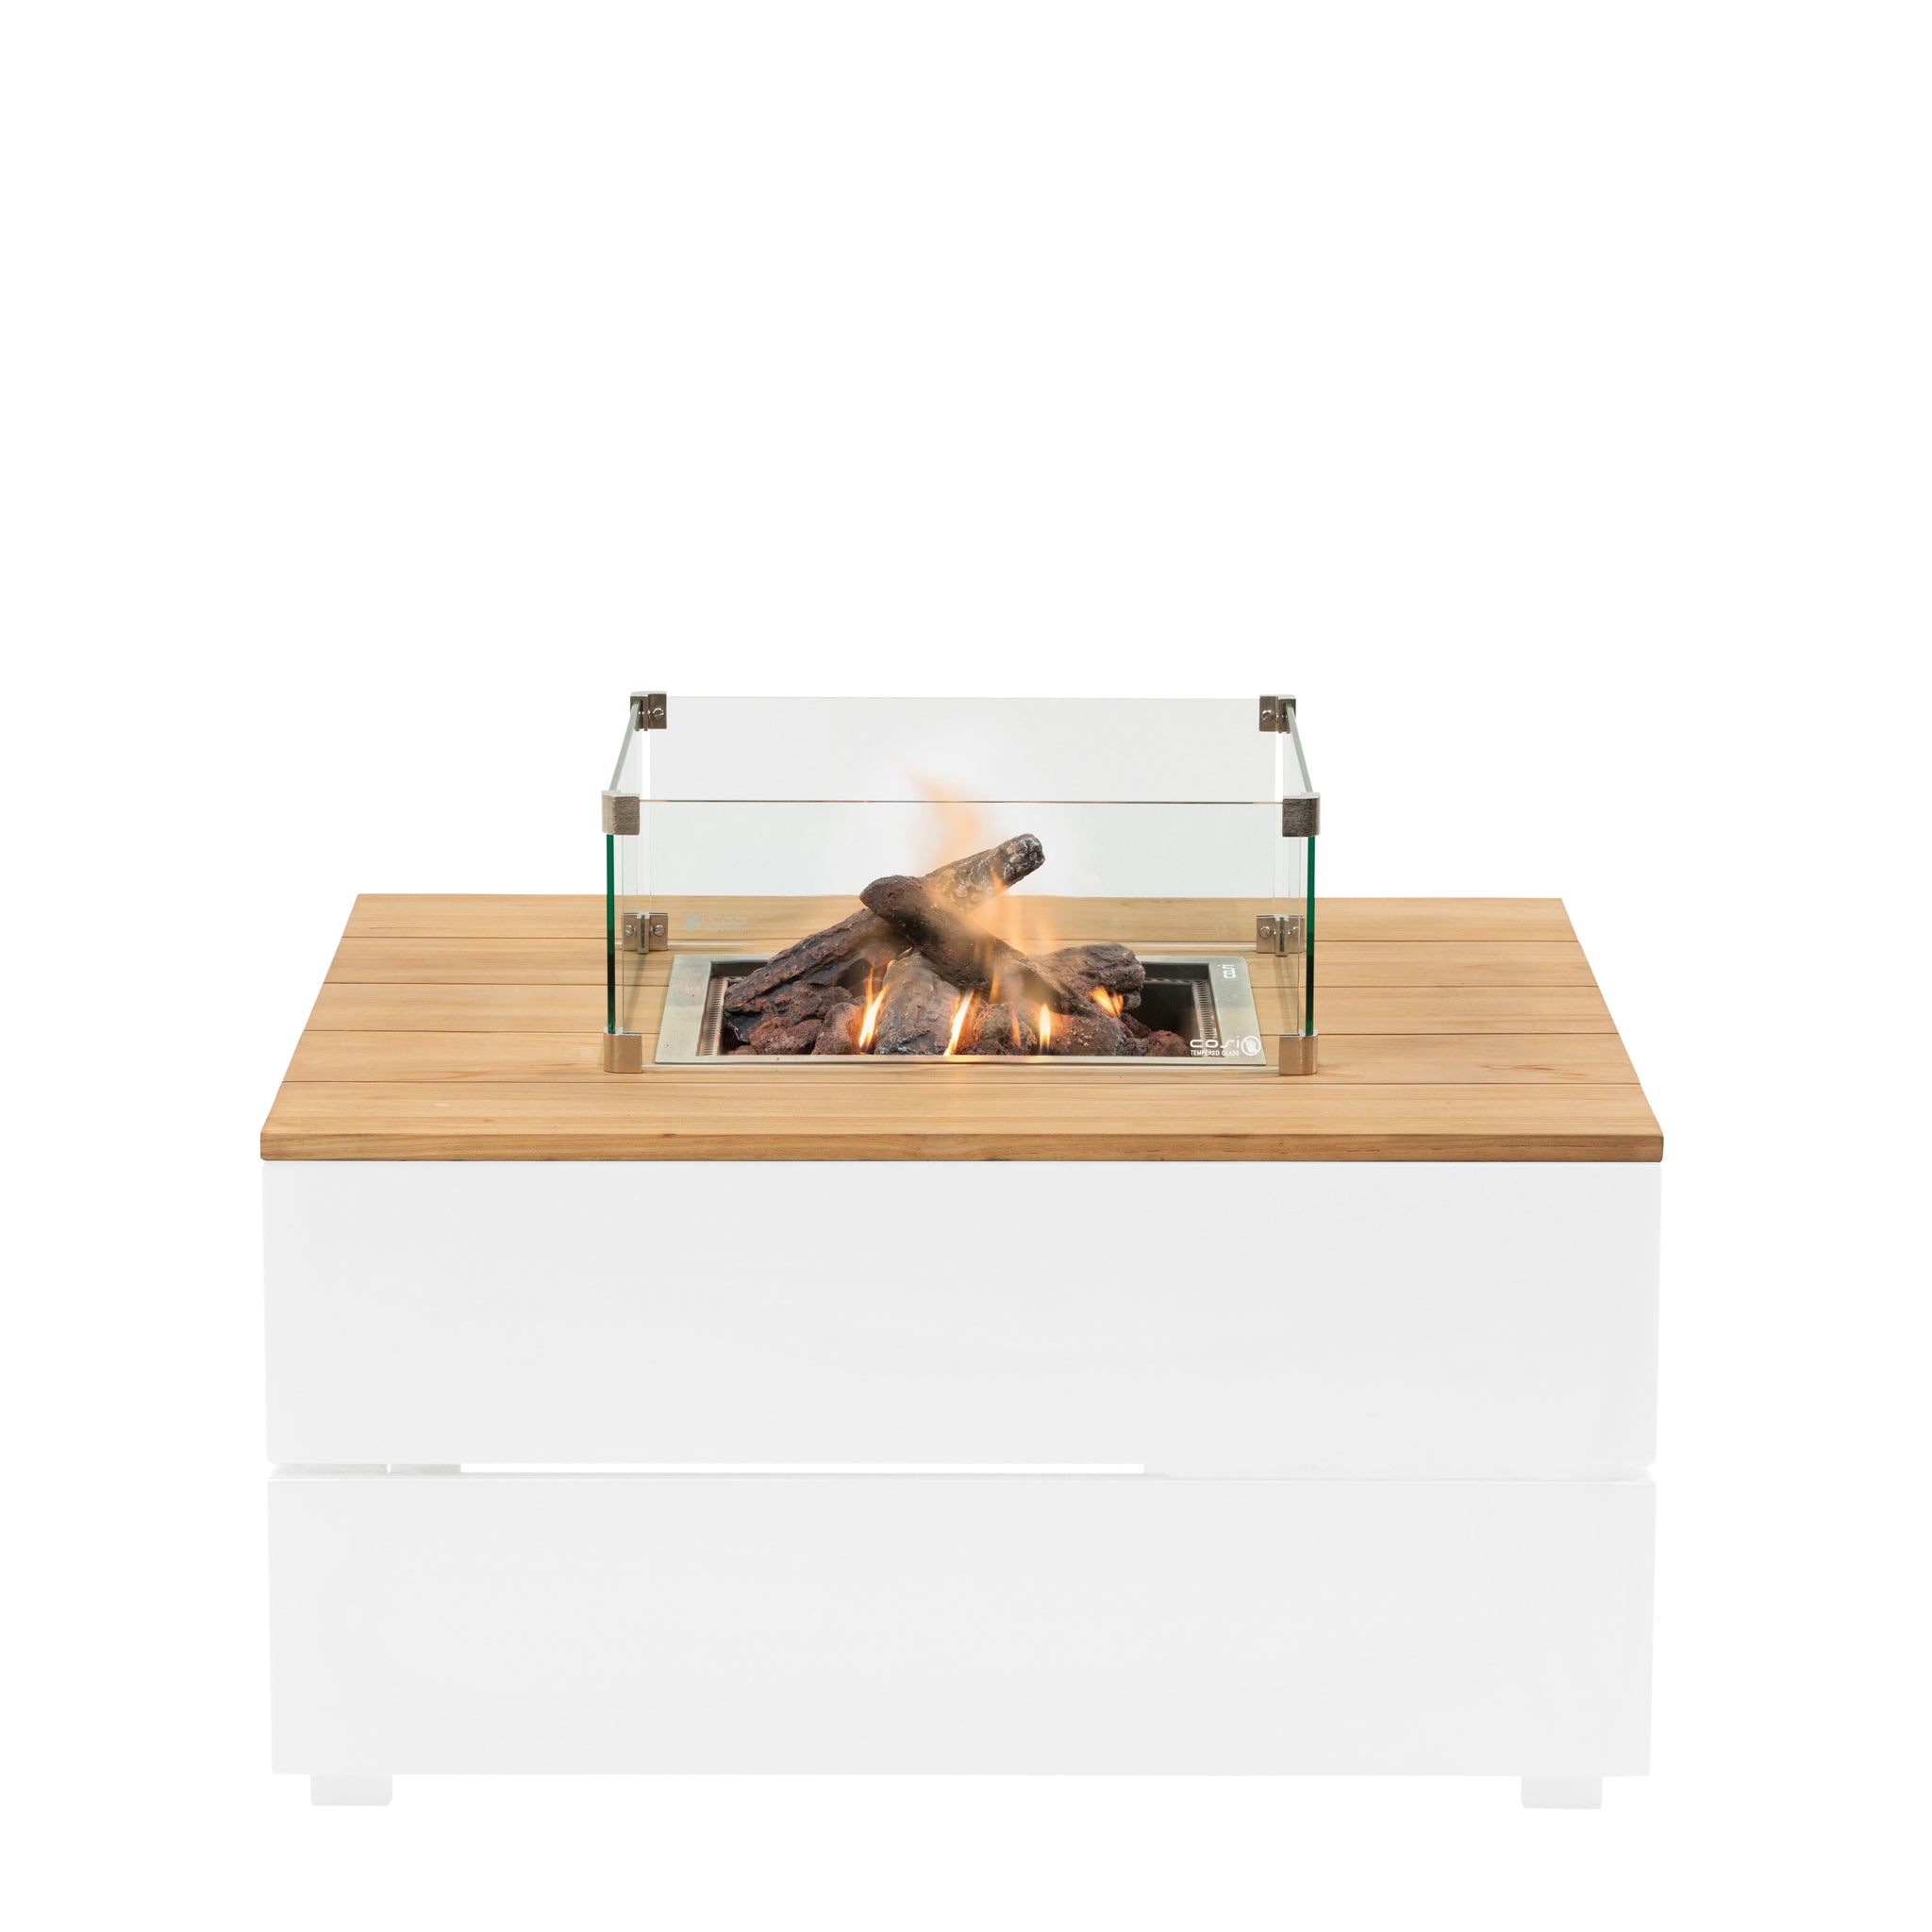 Cosipure 100 White and Teak Square Fire Pit